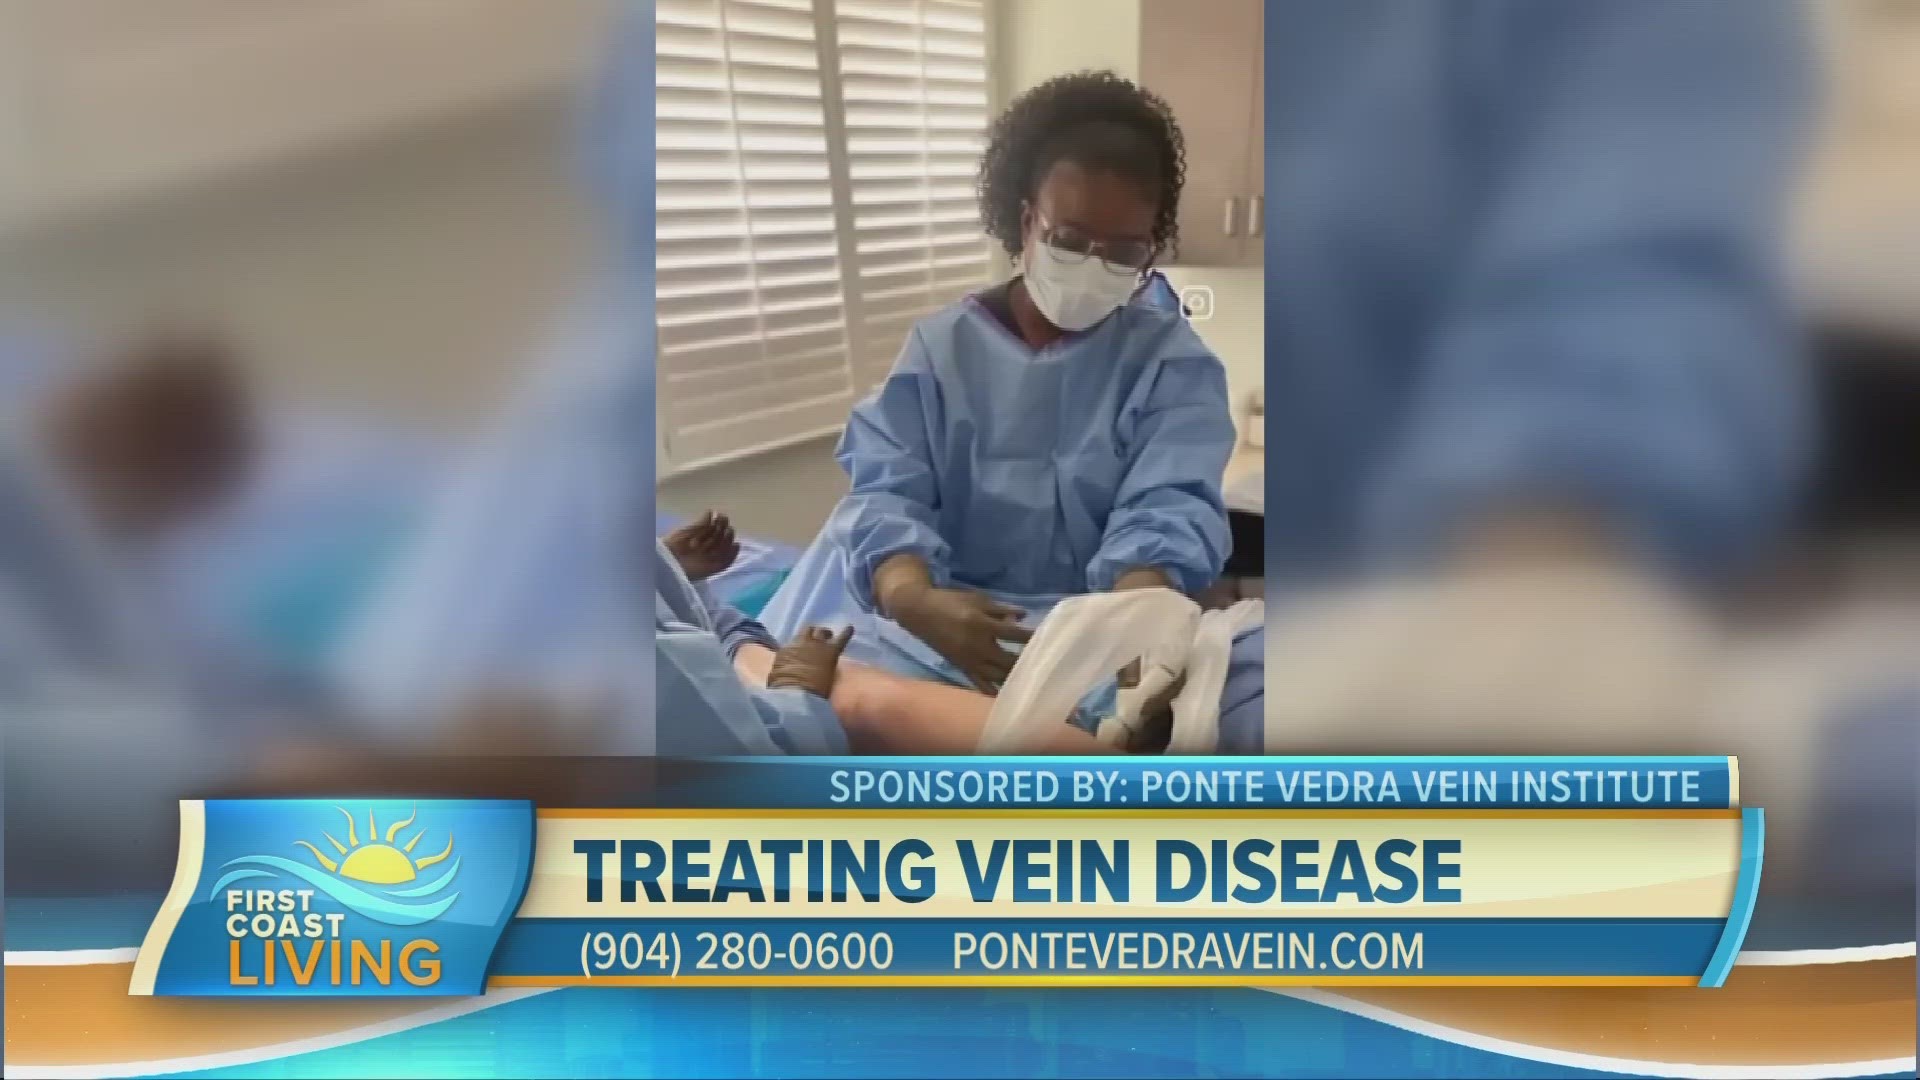 Ponte Vedra Vein Institute treats varicose veins and venous disorders. Learn how they may be able to help you.